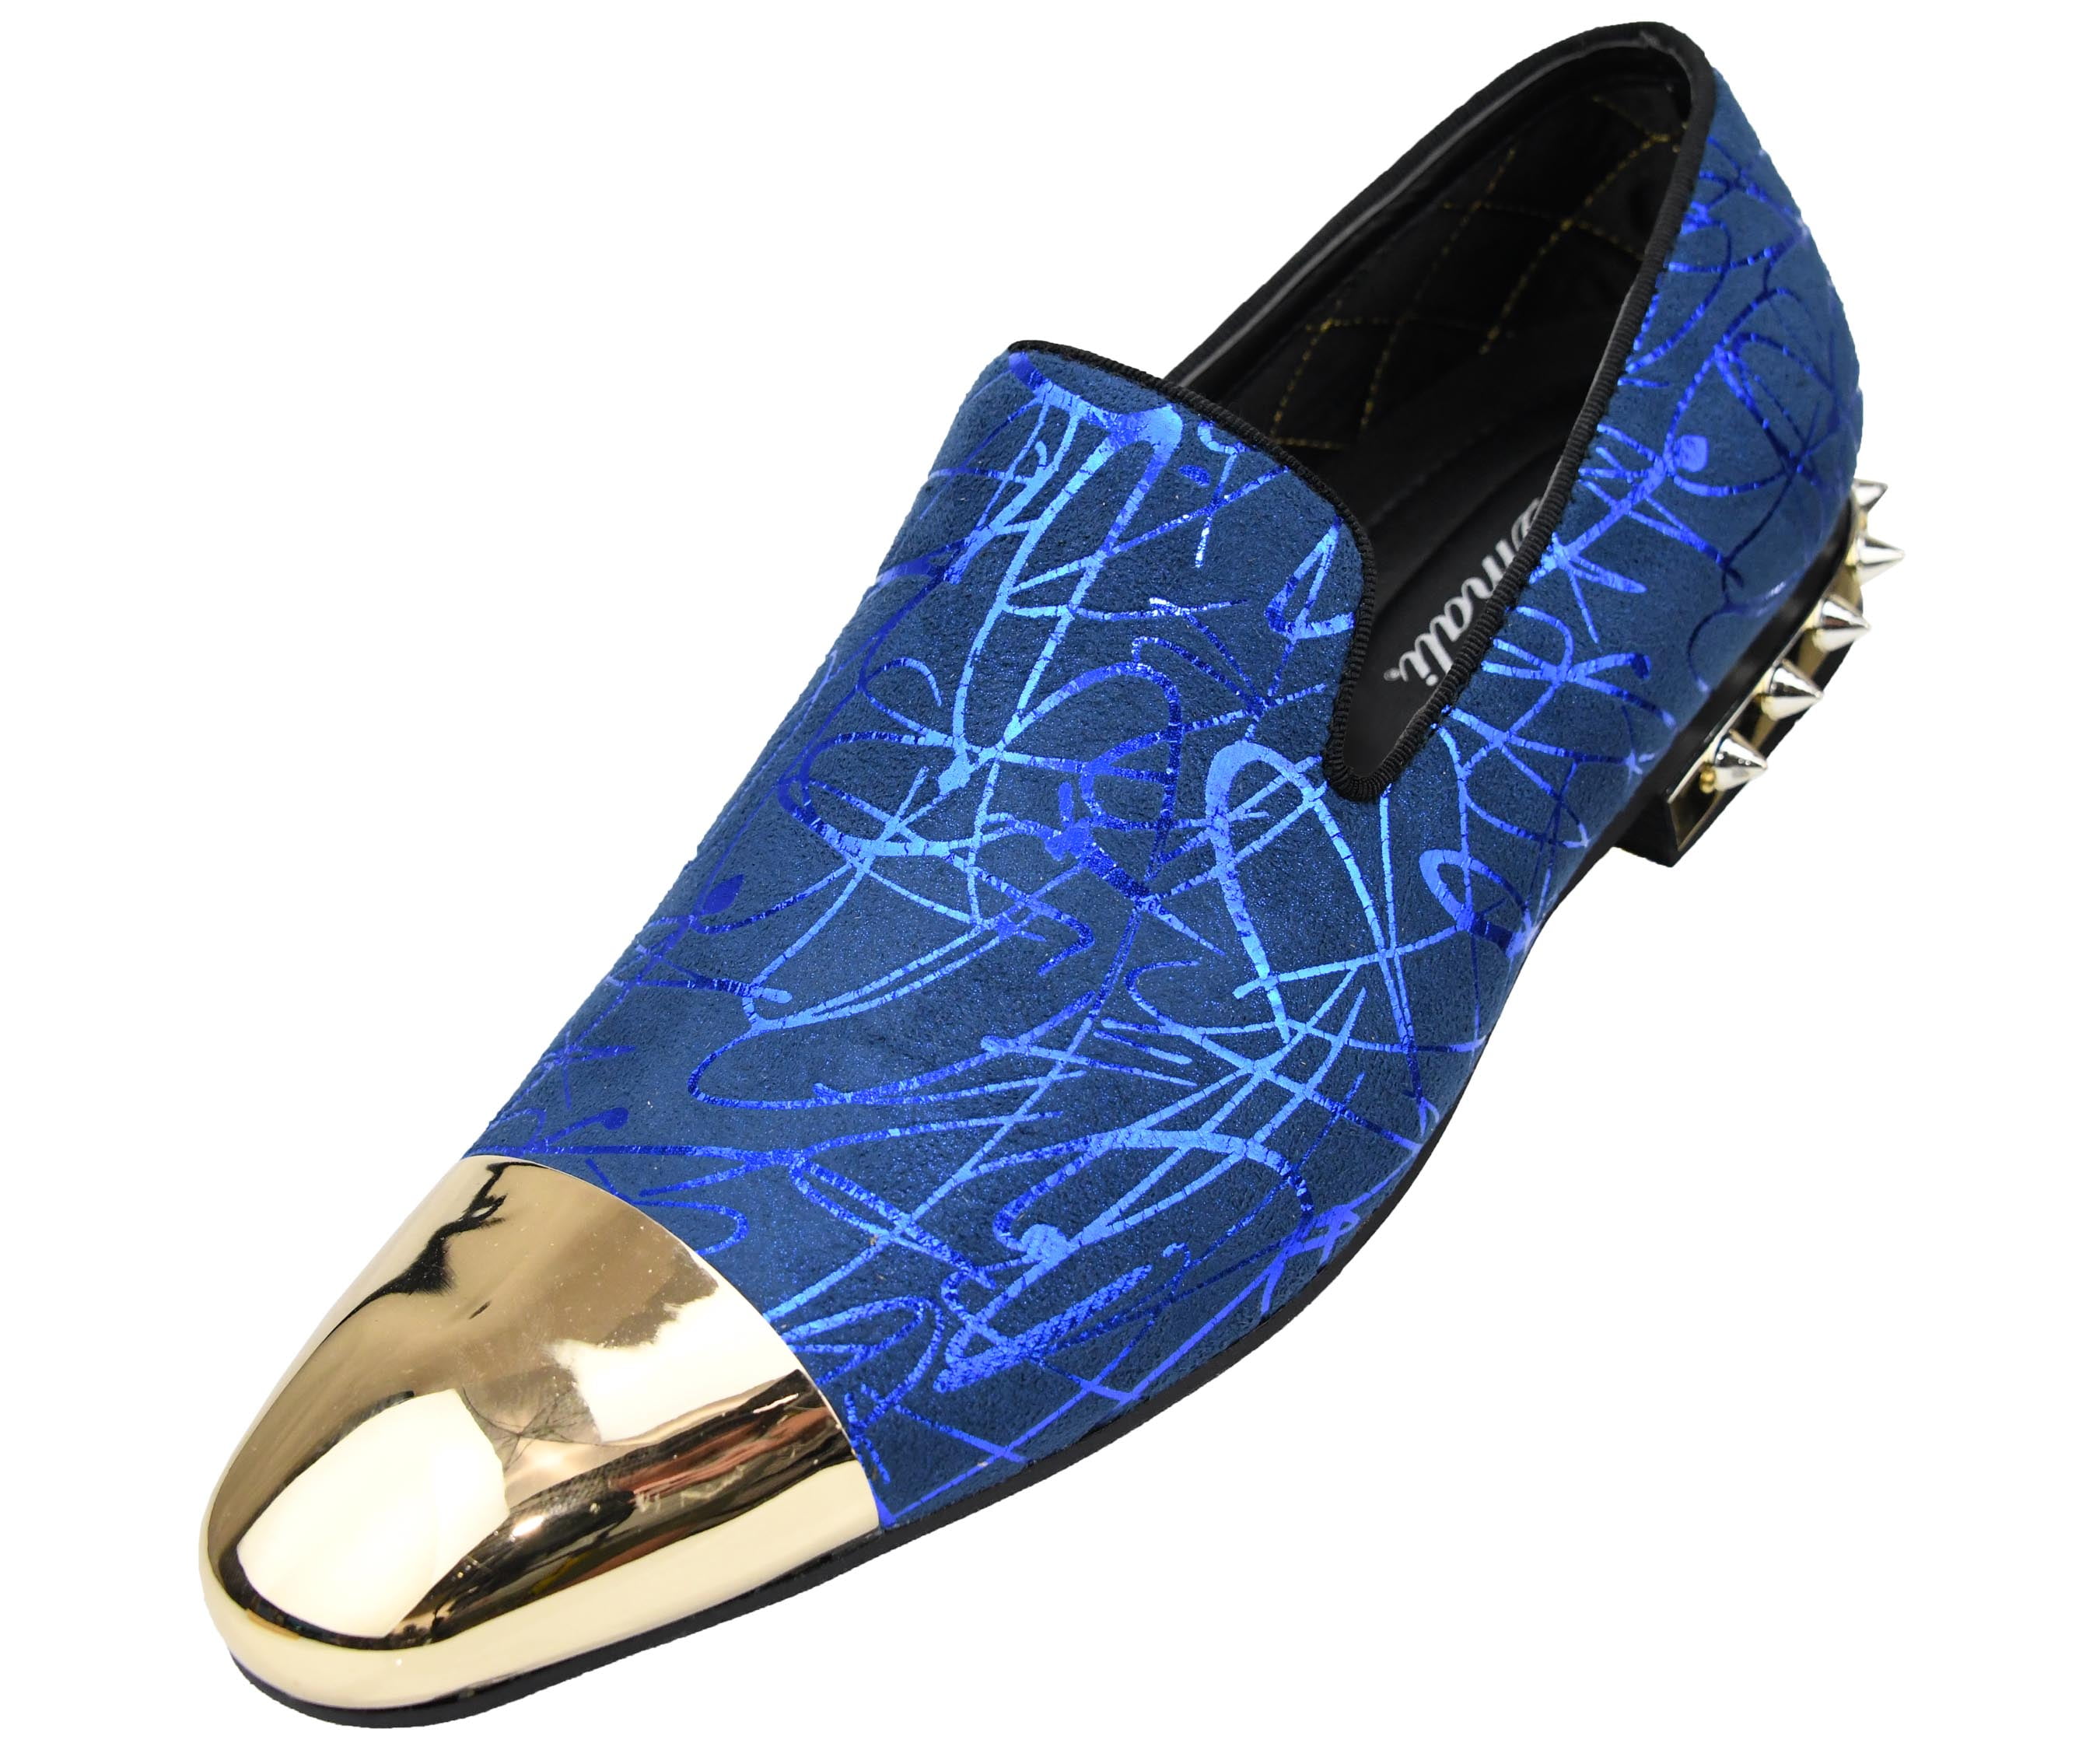 Graphic Patterned Smoking Slipper 